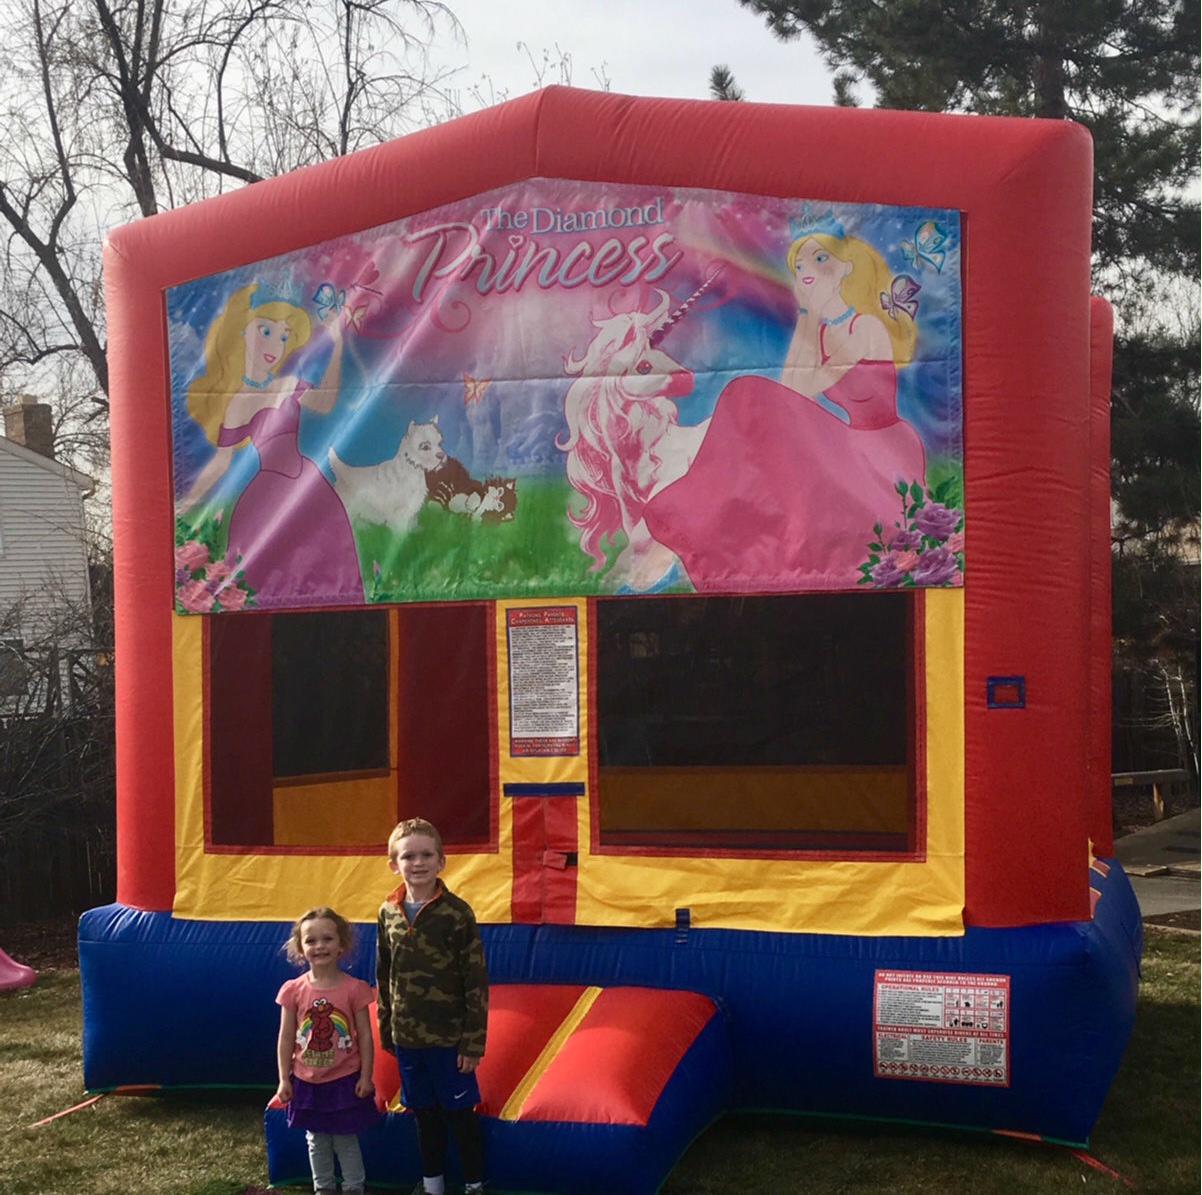 The big house, bouncy castle with princess theme.